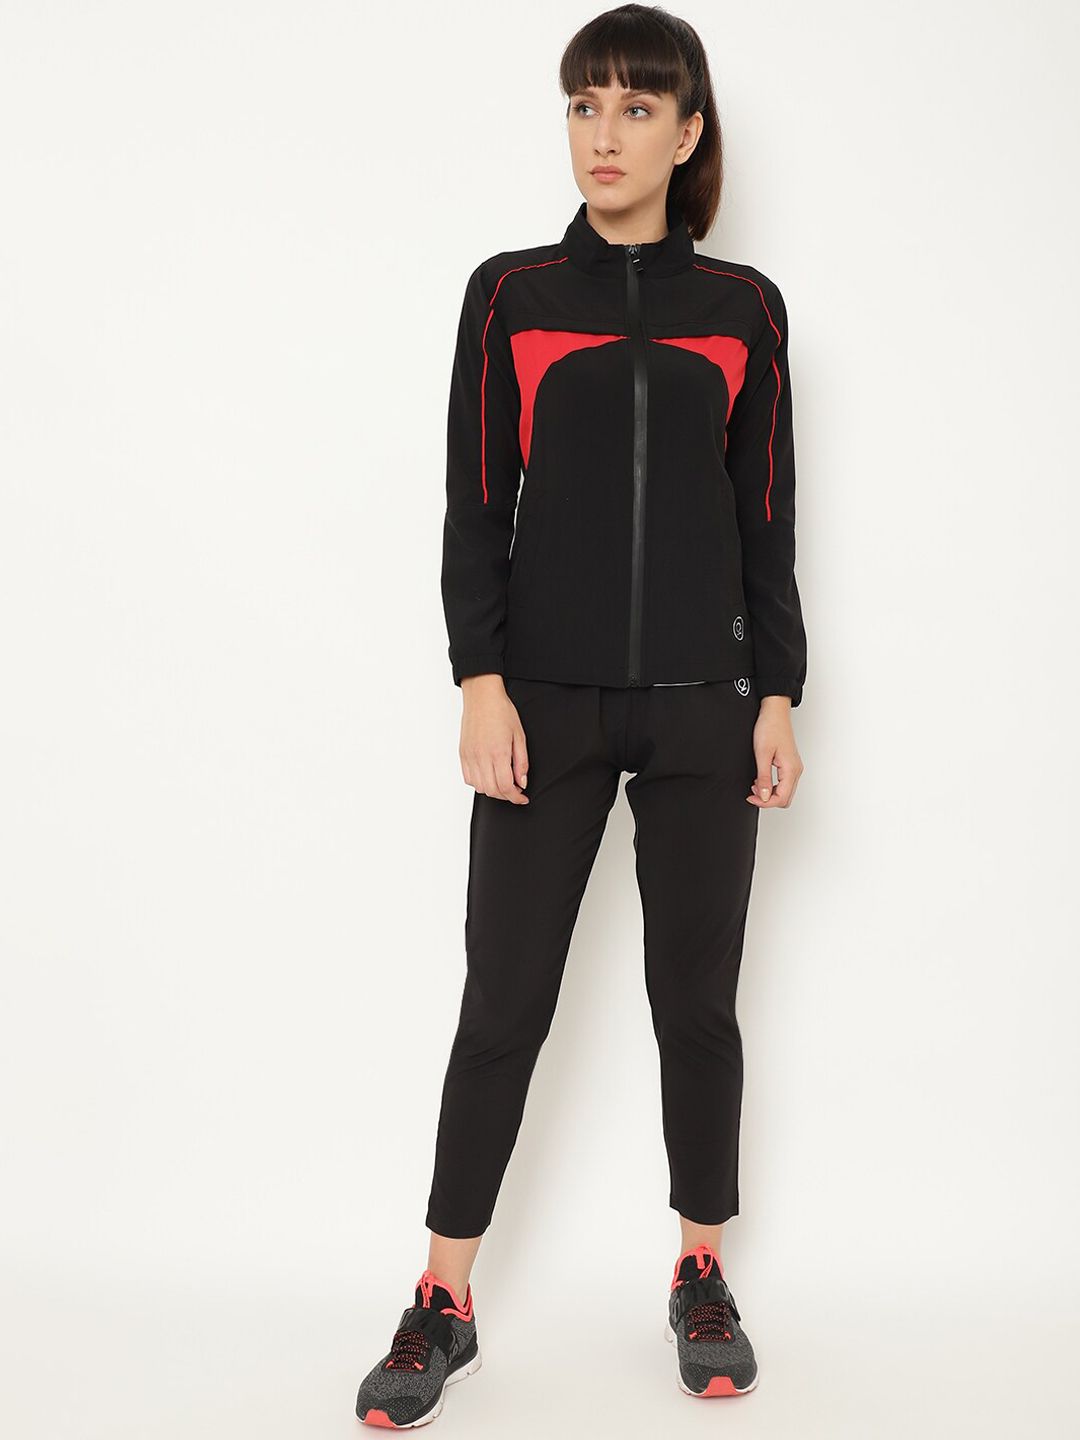 Chkokko Women Black & Red Solid Tracksuits Price in India